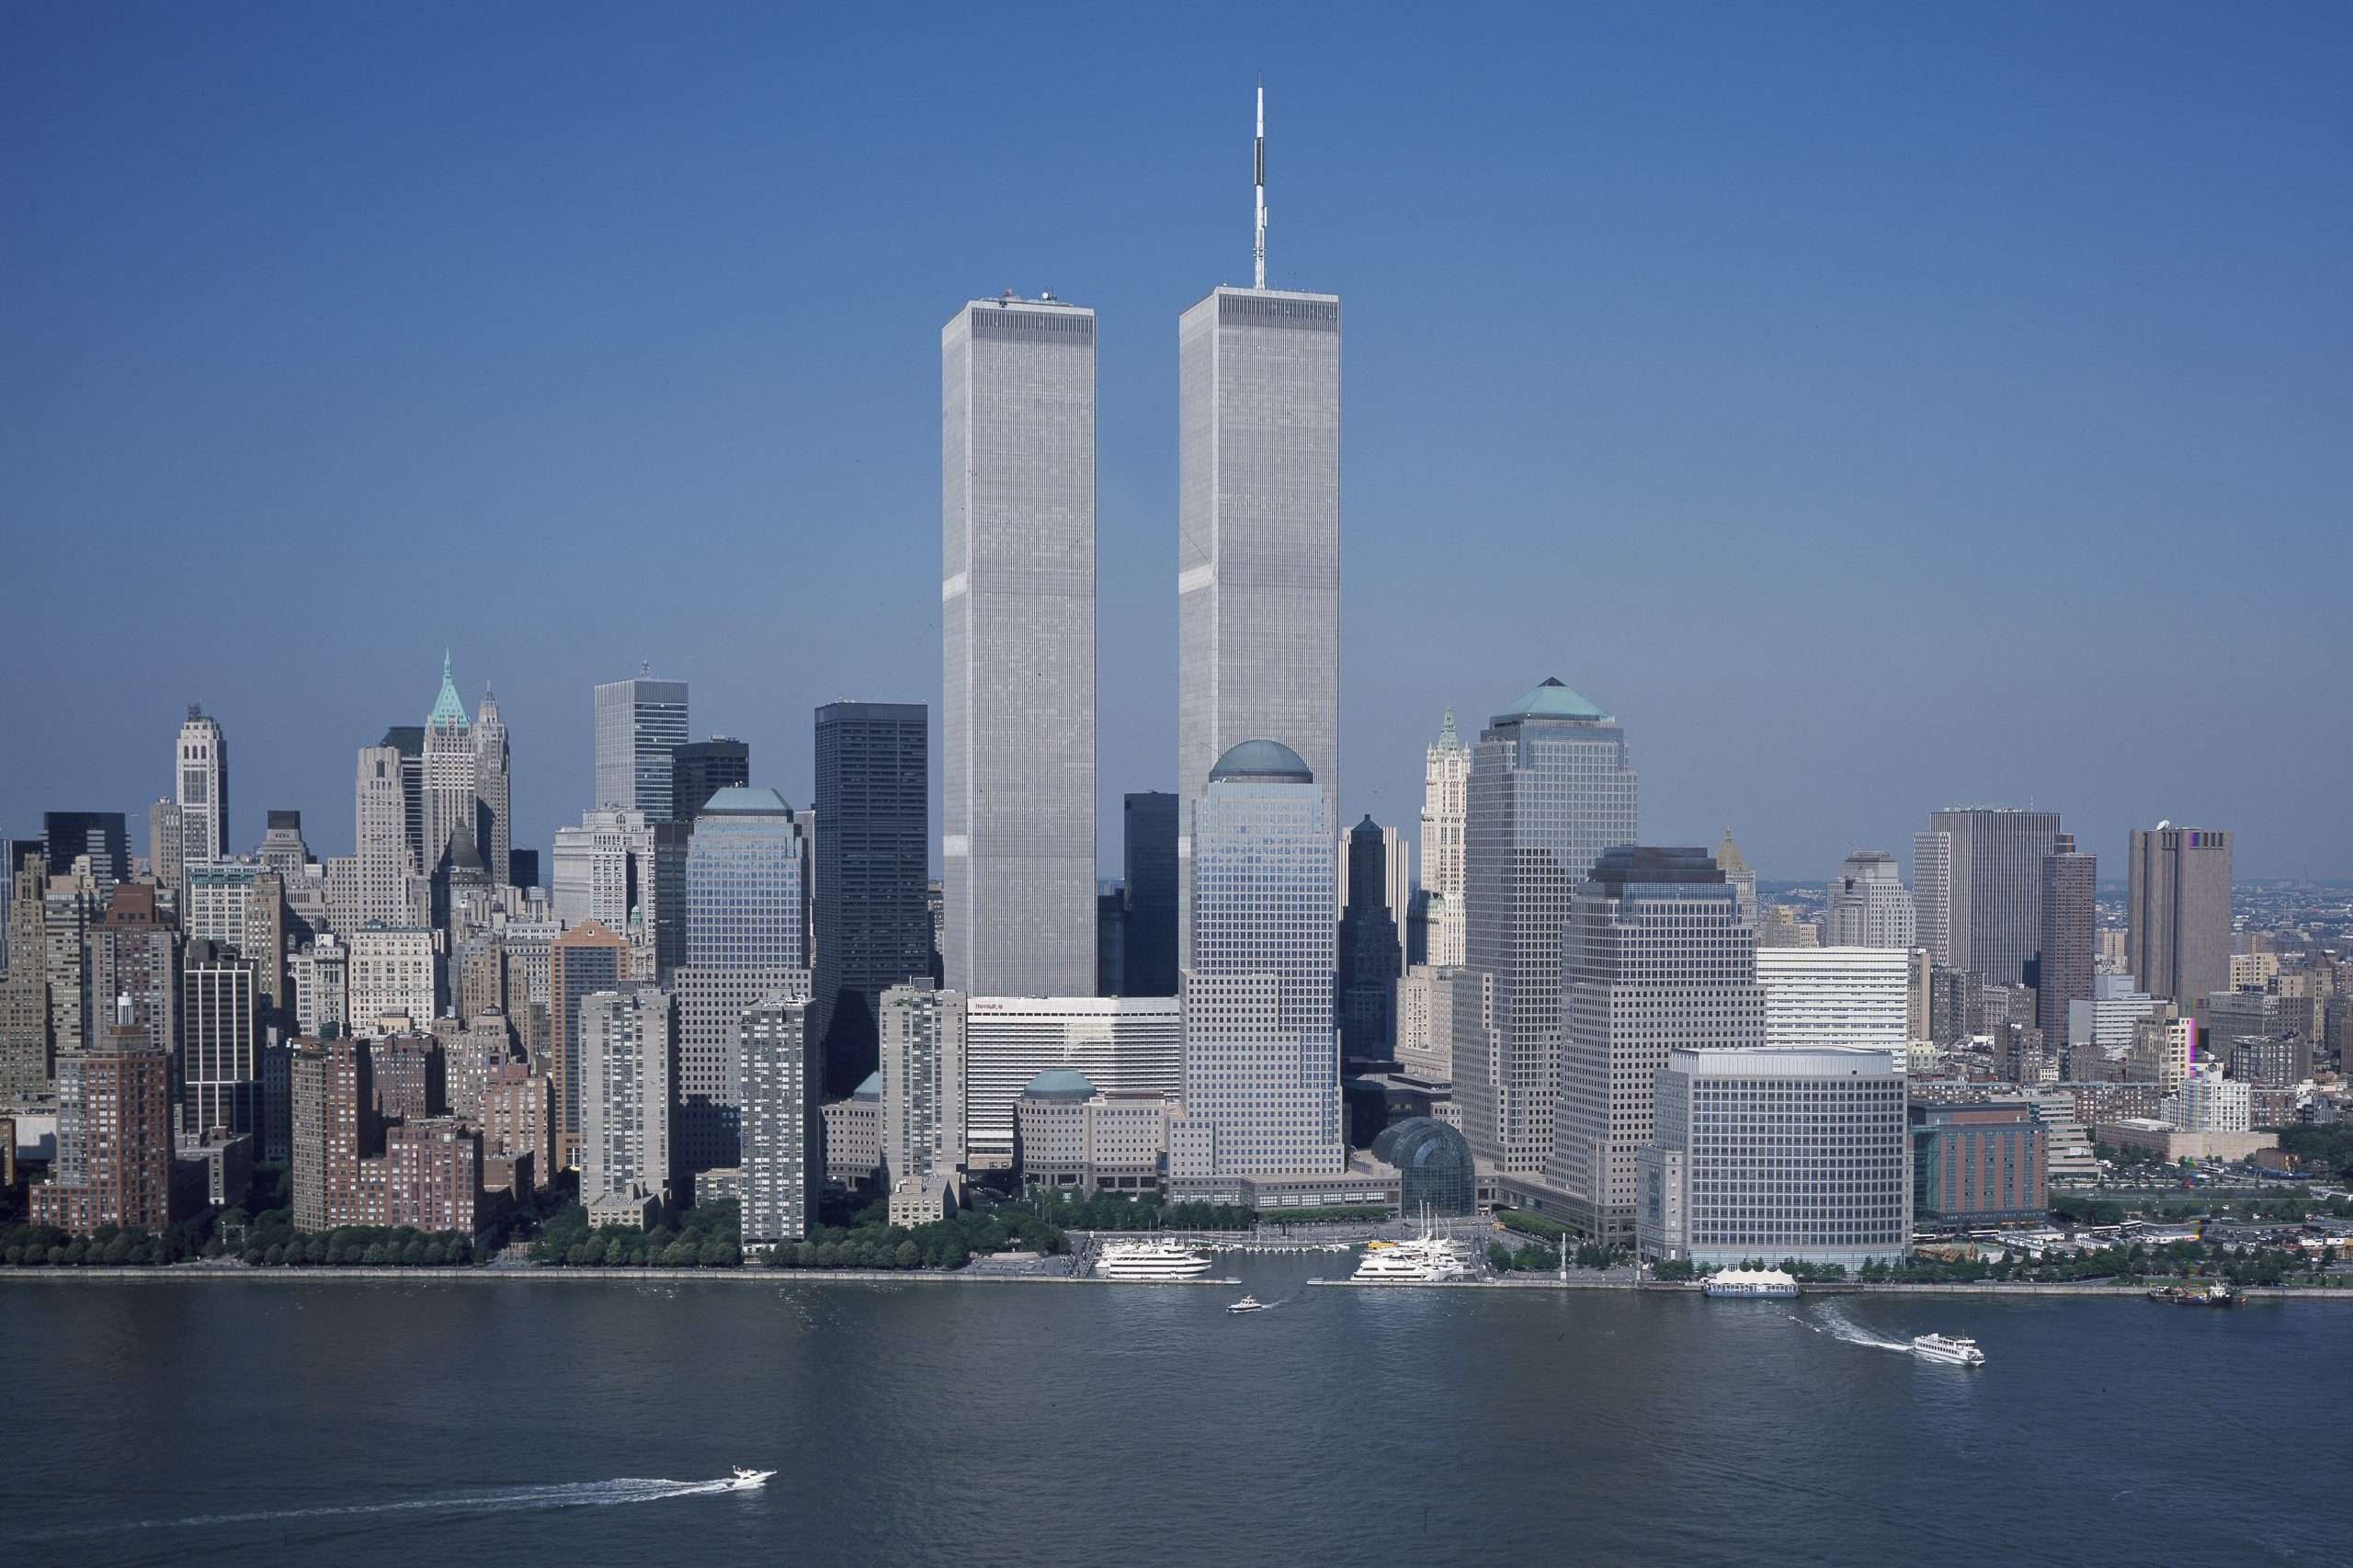 TIL that there is a third world trade center tower in ...